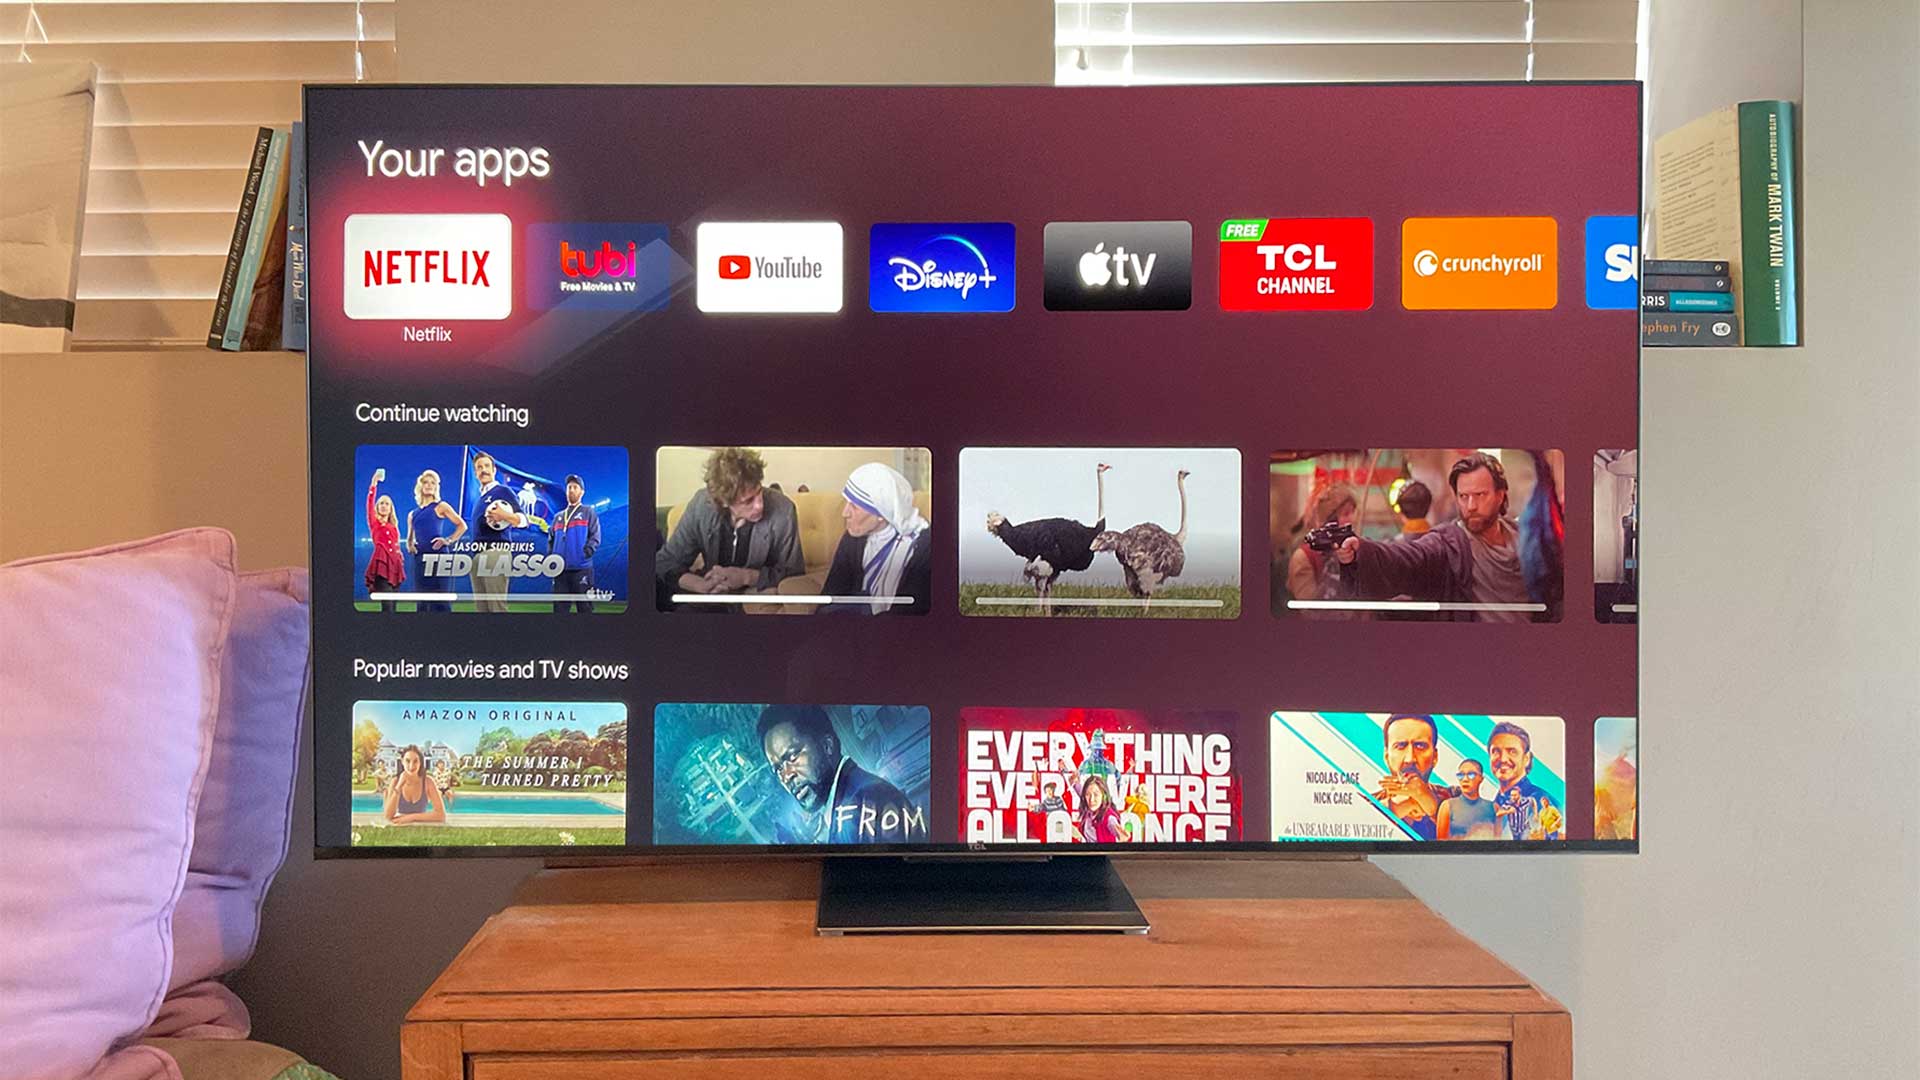 TCL C845 Mini LED: FULL REVIEW IN 5 MINUTES / Smart TV 4K / 144Hz HDR VRR  Dolby Vision 